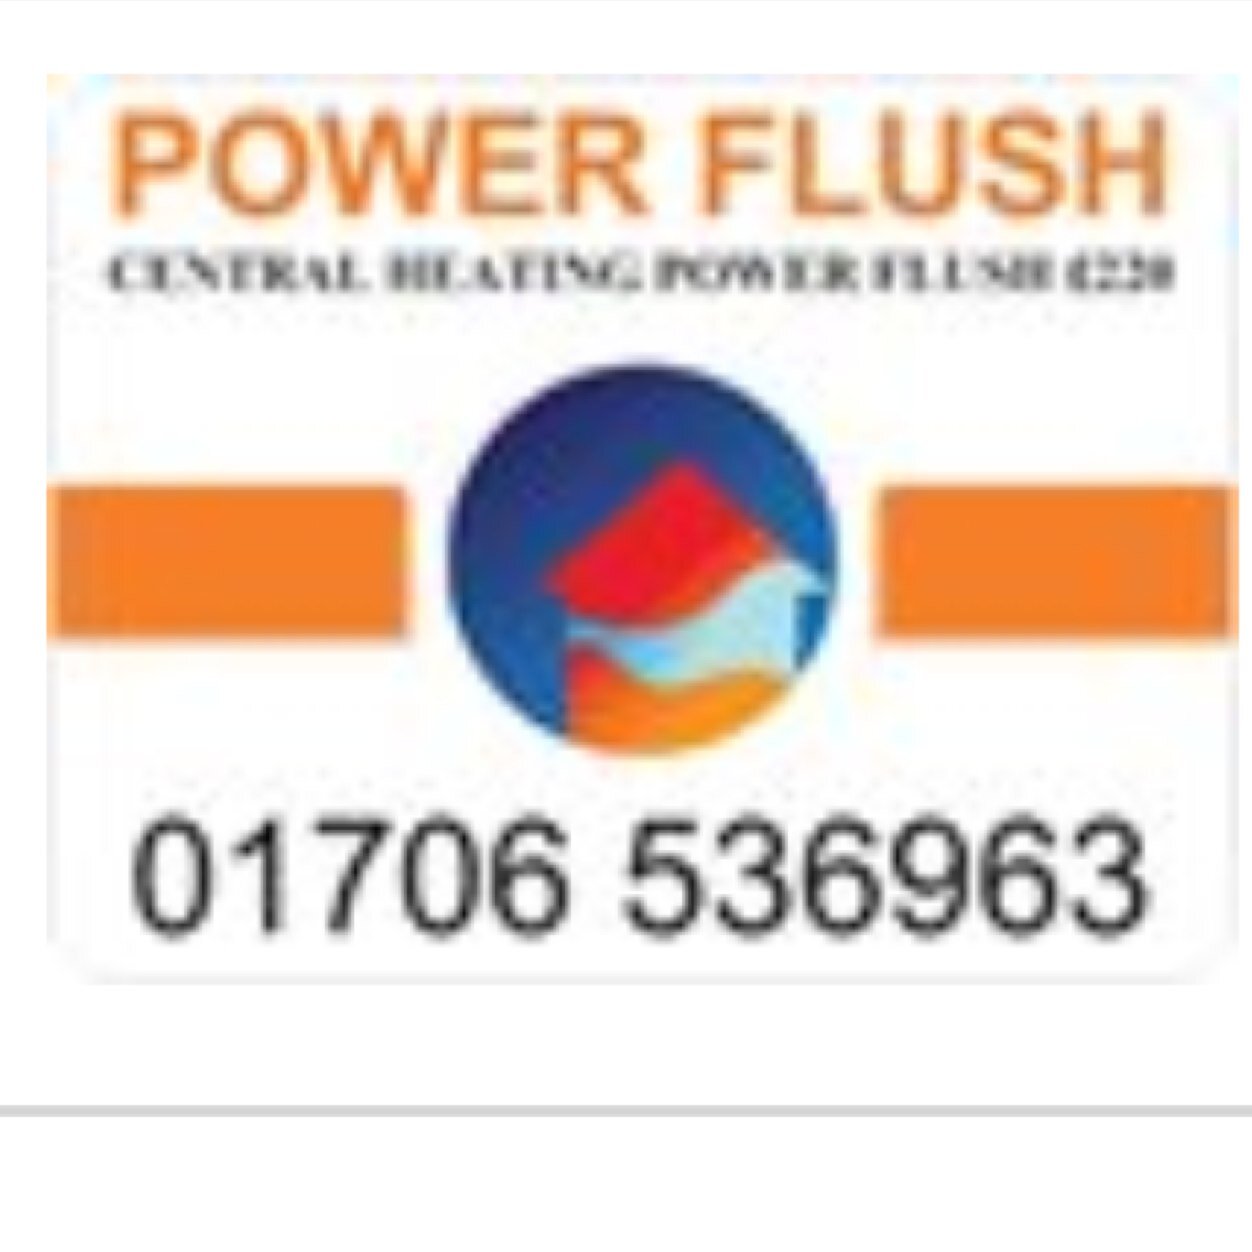 #powerflush powerflush for only £220, clean your heating and save money!!!!! Powerflush only £220!!! Call jody on 01706 536963 or mobile 07720218929